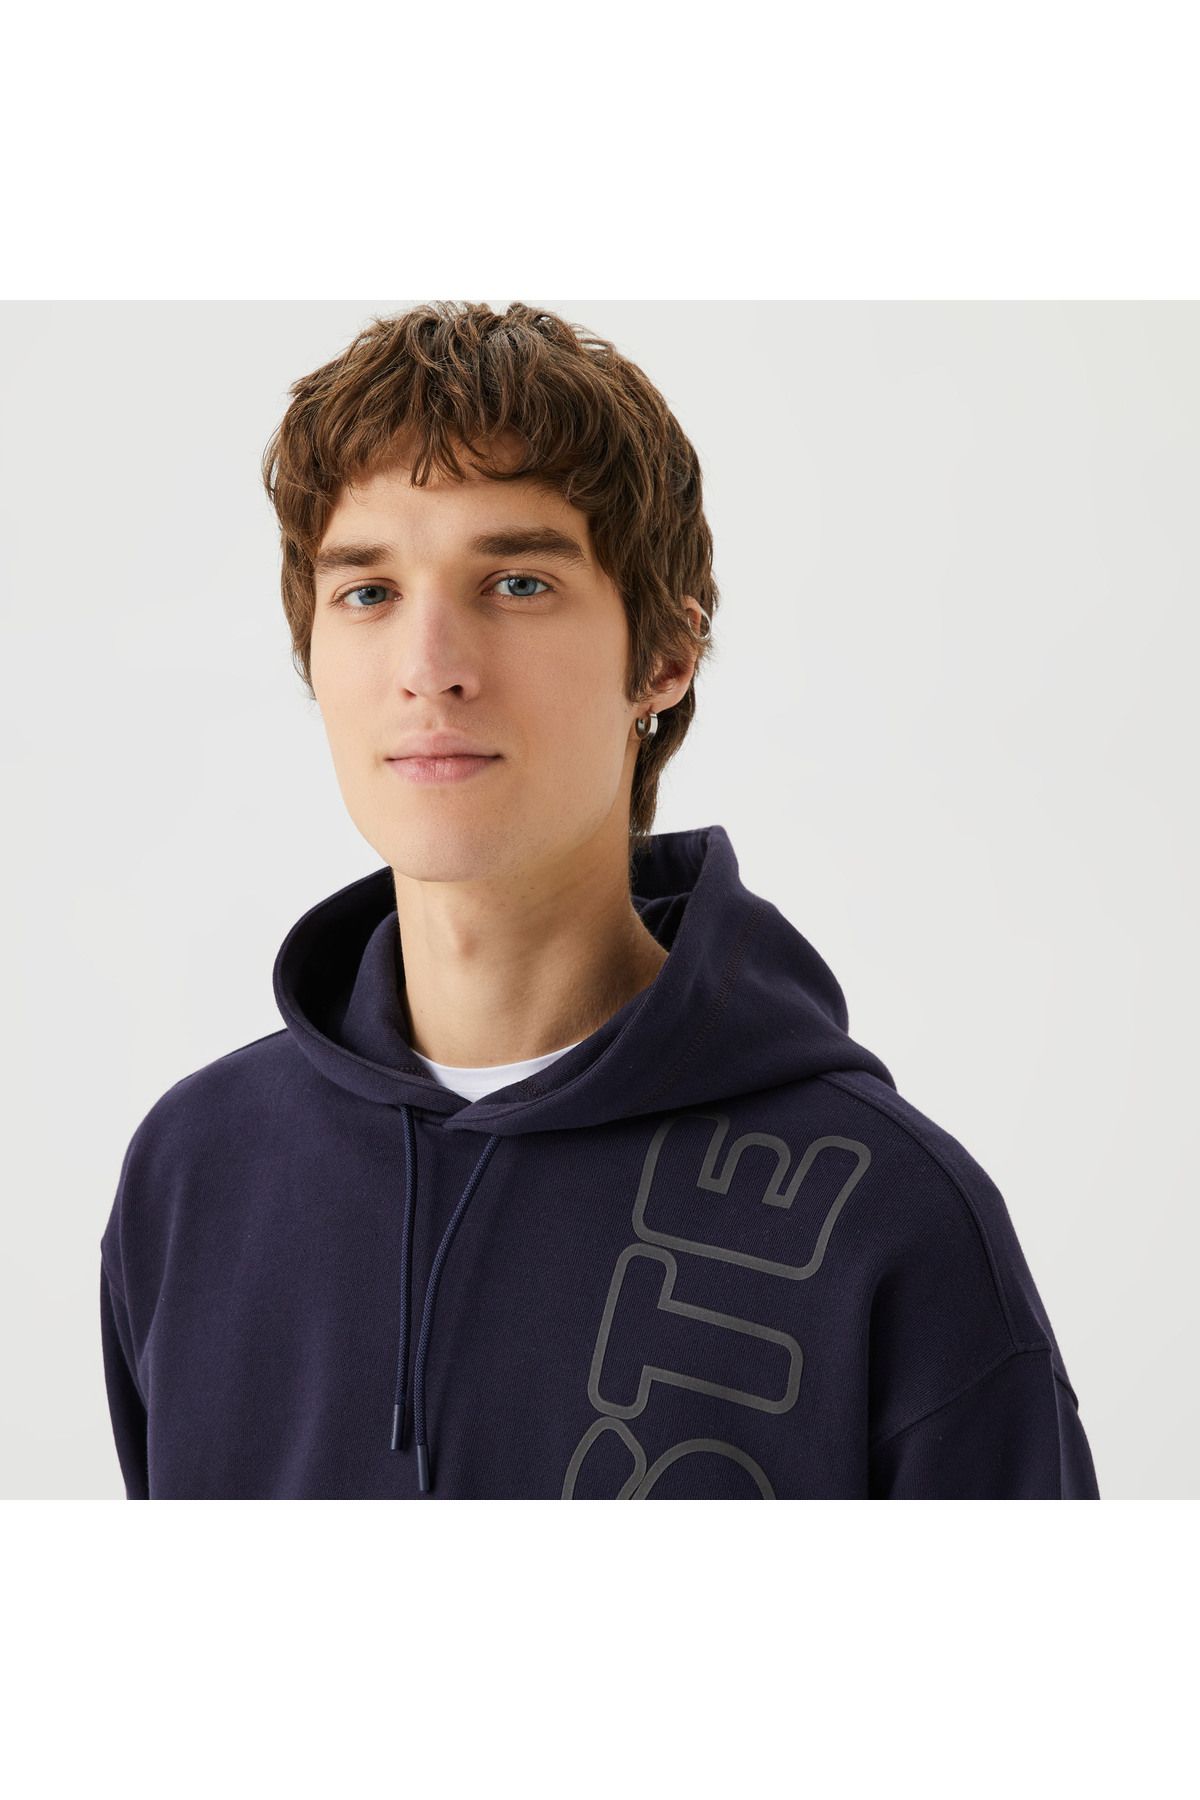 Lacoste Unisex Relax Fit Hooded Printed Blue Sweatryrt